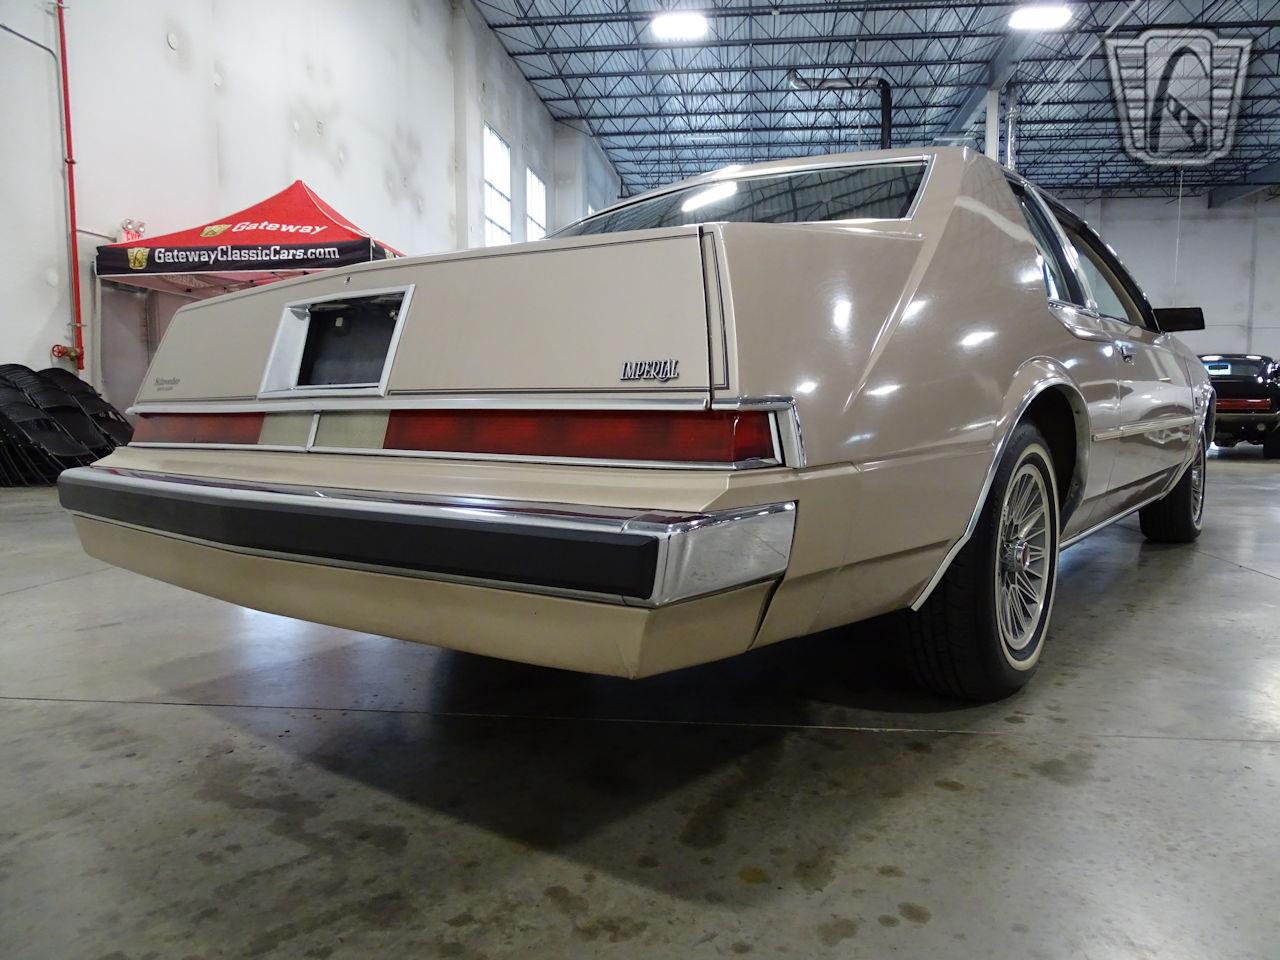 1981 Chrysler Imperial for sale in O'Fallon, IL – photo 47